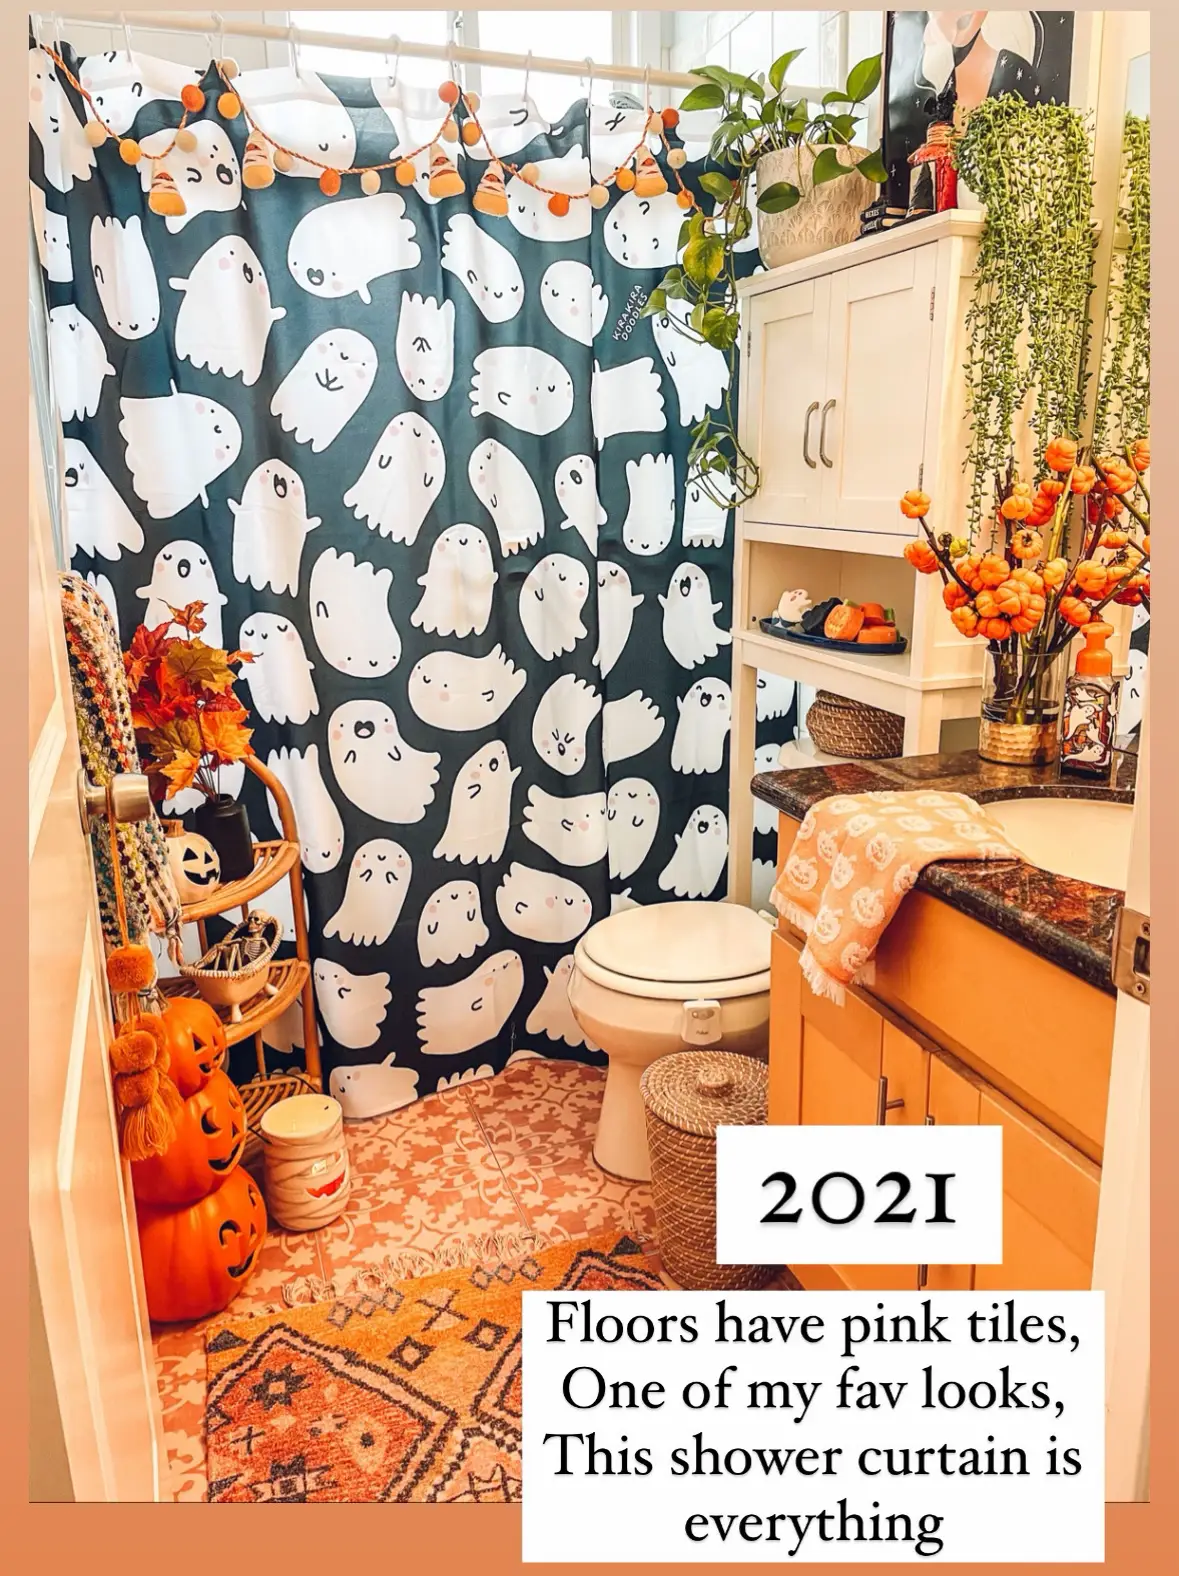  A bathroom with a pink shower curtain and a potted plant.